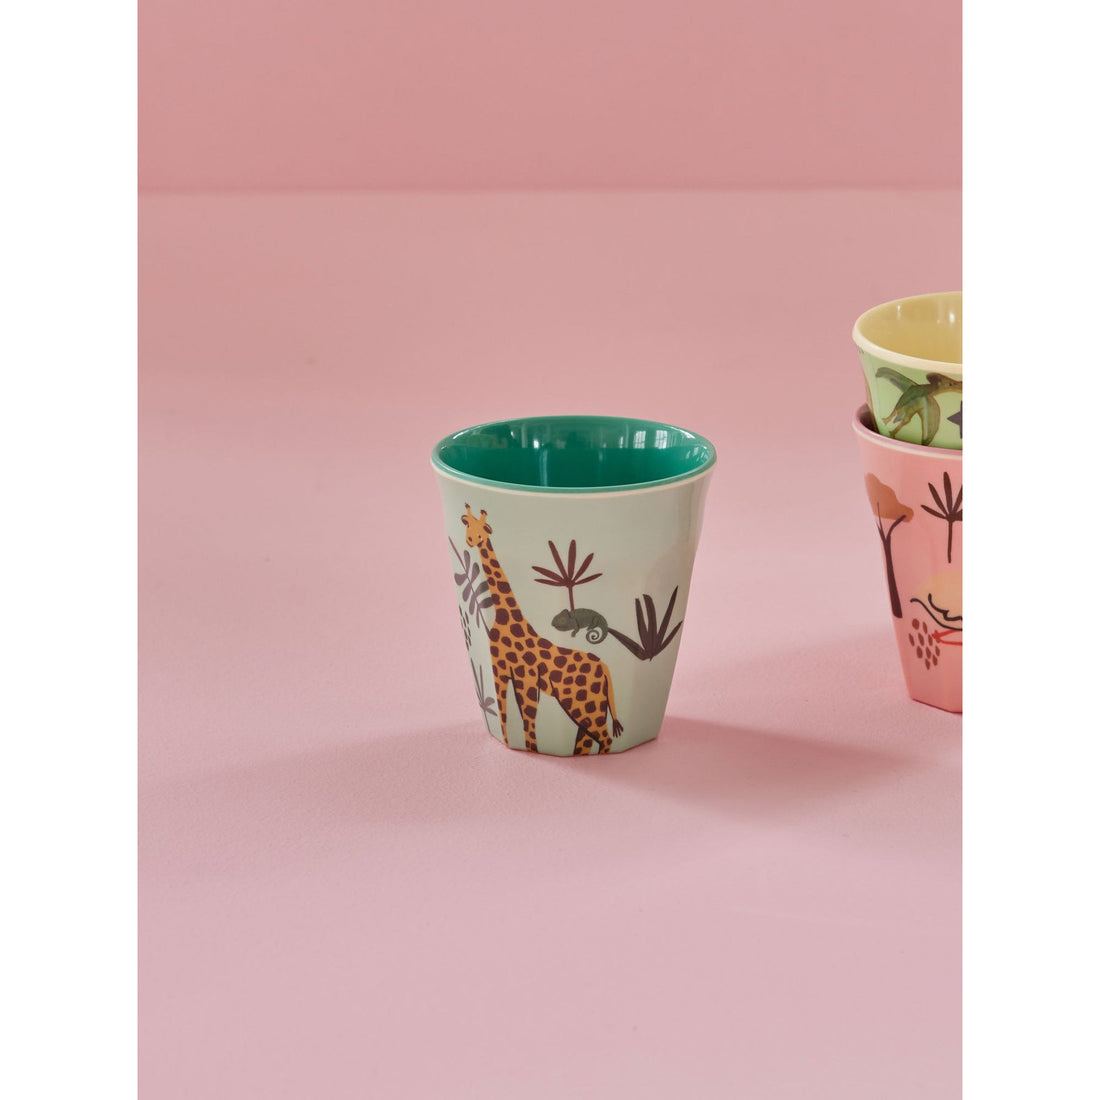 rice-dk-melamine-kids-cup-with-blue-jungle-animal-print-small-160-ml-rice-kicup-jungb2